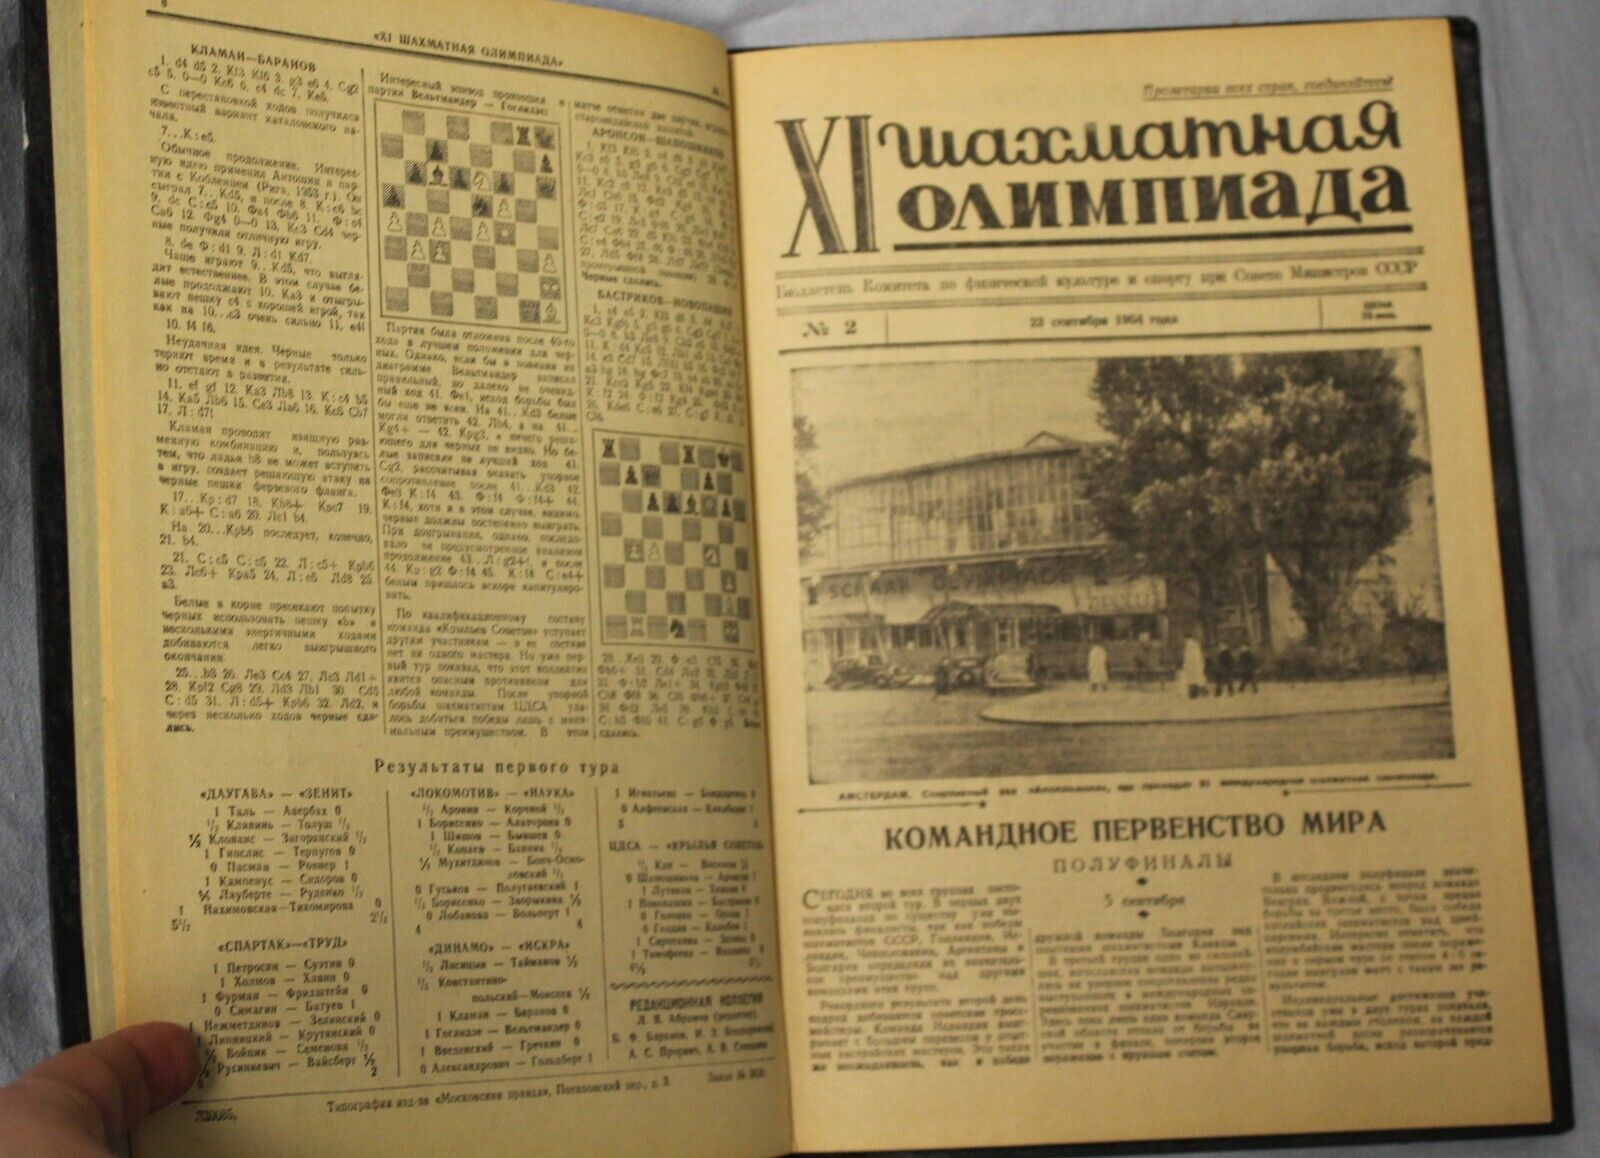 11243.Complete set 20 Soviet Chess Bulletins XI Chess Olympiad 1954.Publisher' binding